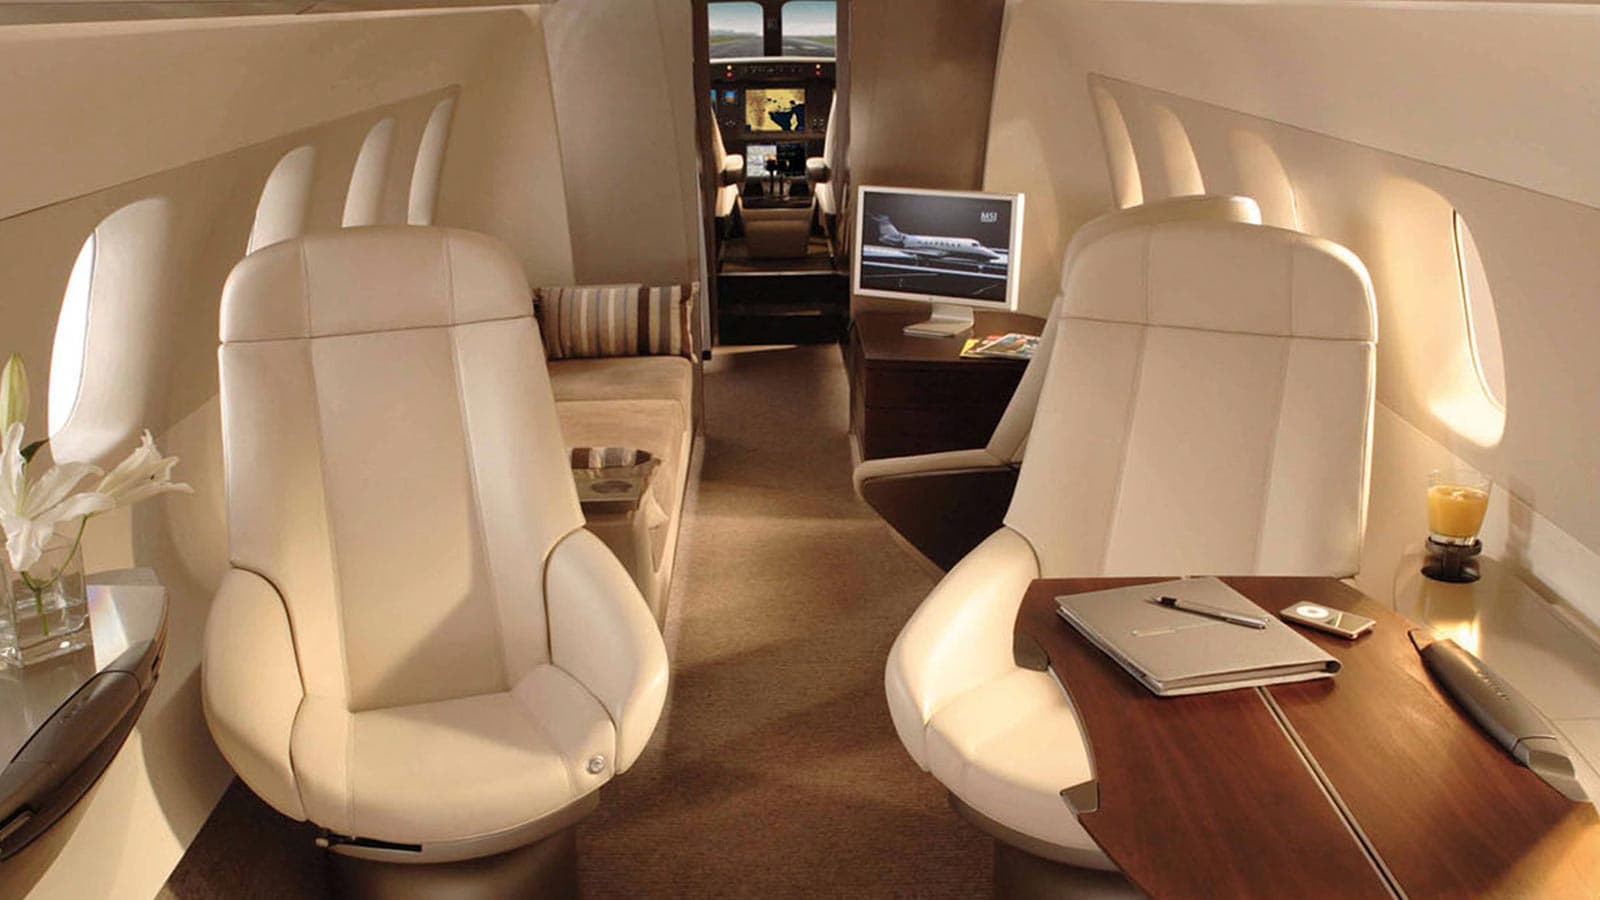 Living The High Life In The UAE: Exclusive Luxuries Of Private Jet Travel In The UAE